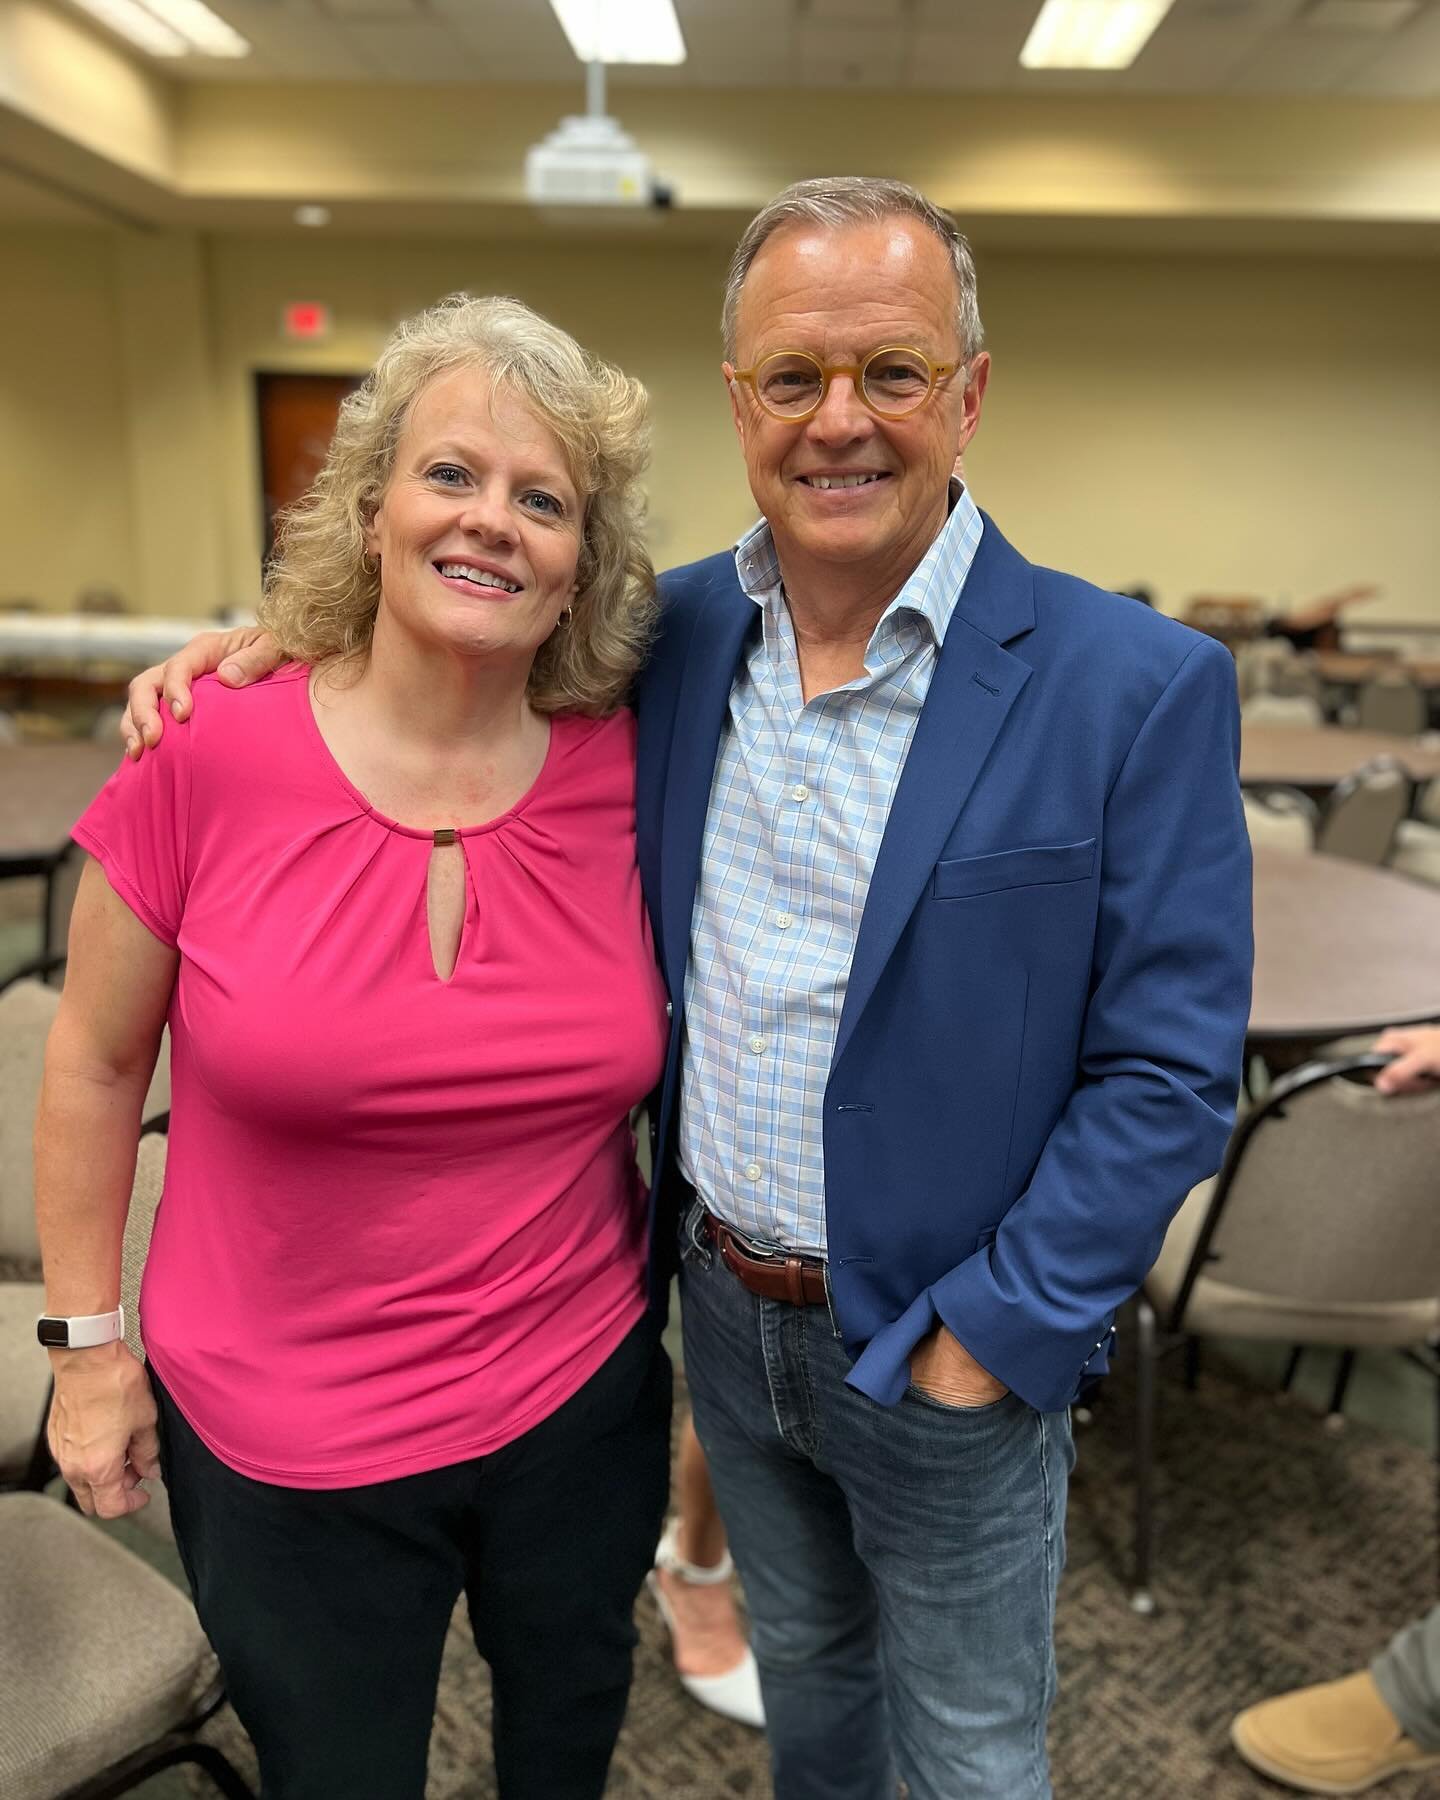 My sister (Teresa Moen) &amp; I grew up in an unchurched home. We were invited to church by a neighbor when I was 14 &amp; she was 12. We became Christians the same week back in 1974. Next month will be our 50th spiritual birthday. 

Tonight I got to